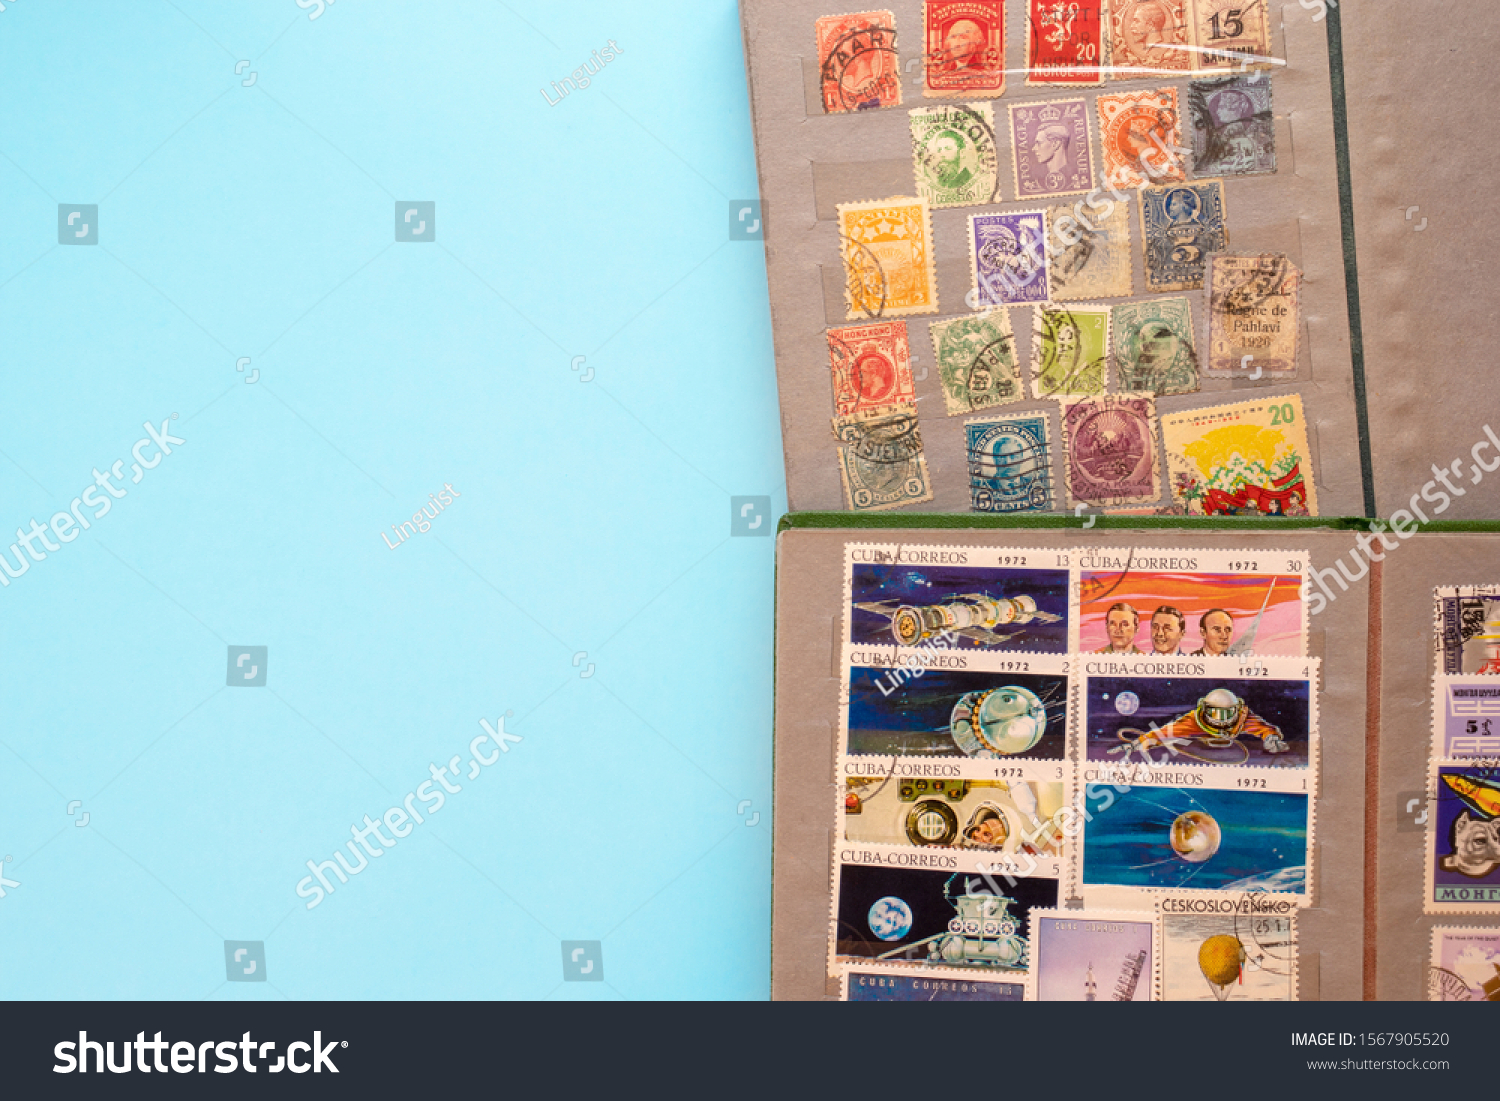 Stamp collecting. Two albums with old expensive valuable post stamps on blue background. #1567905520